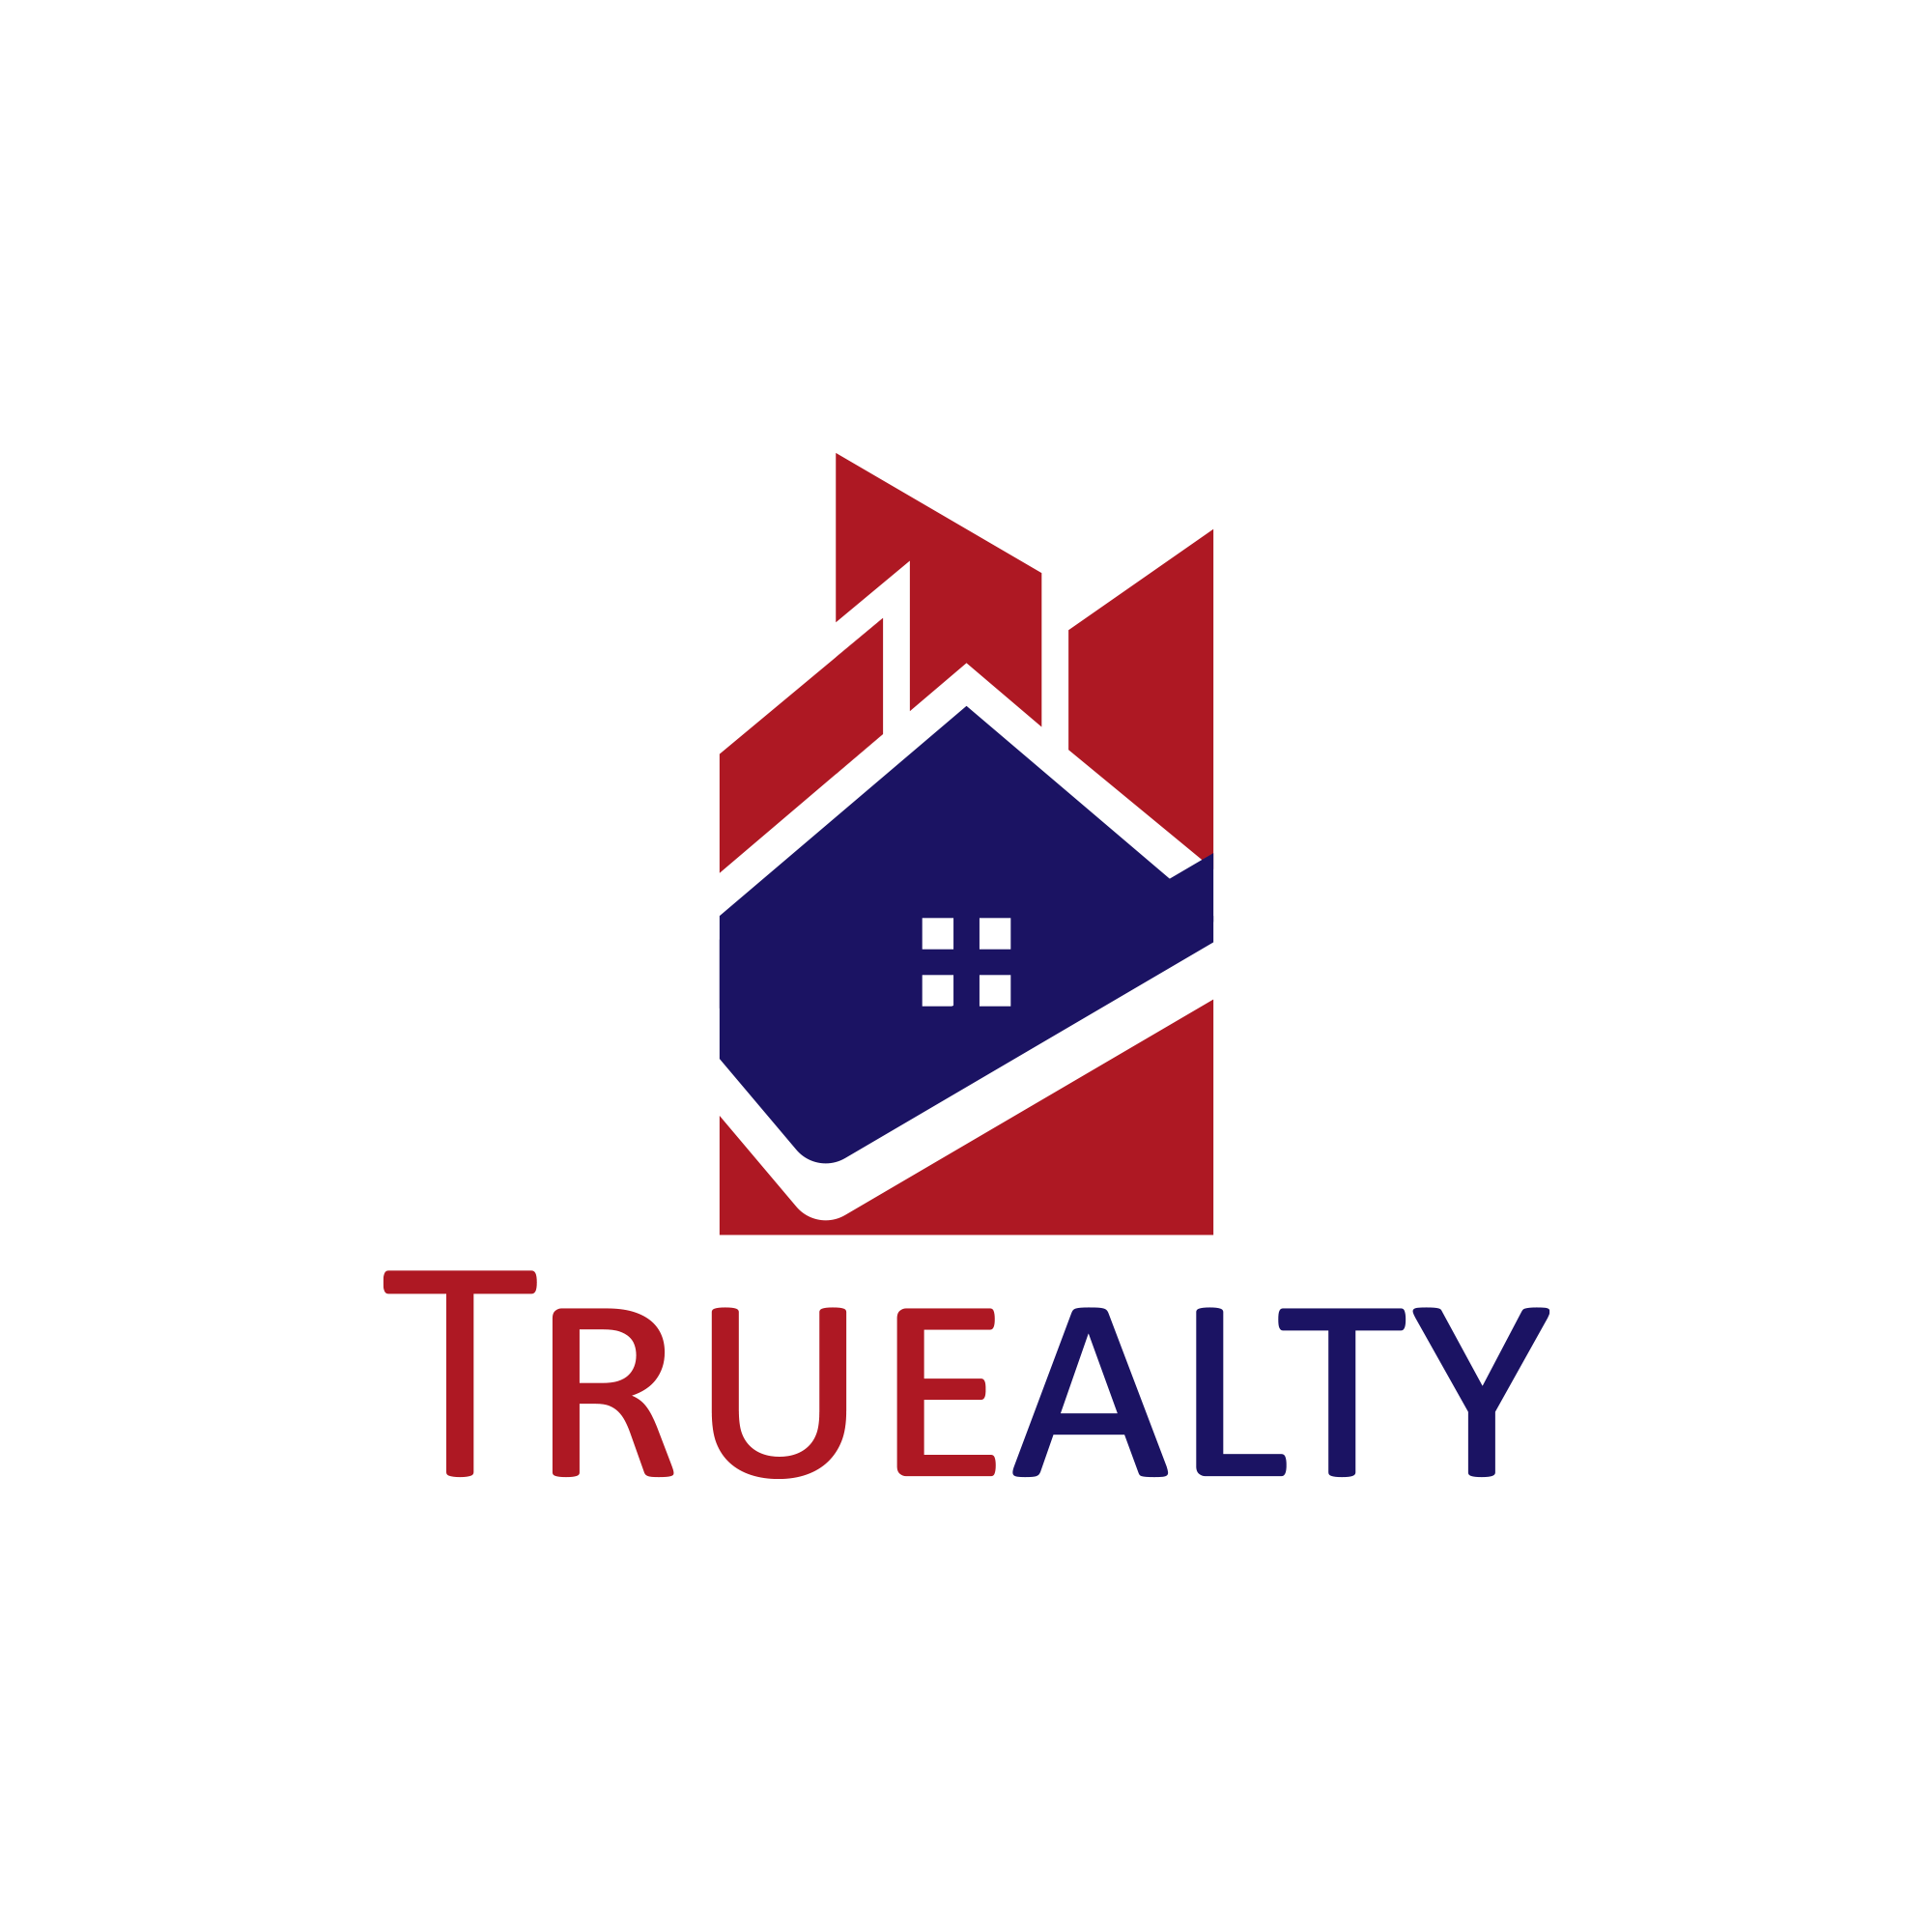 Plumbing Services in VA | Truealty Services | Electrical, HVAC, Remodeling